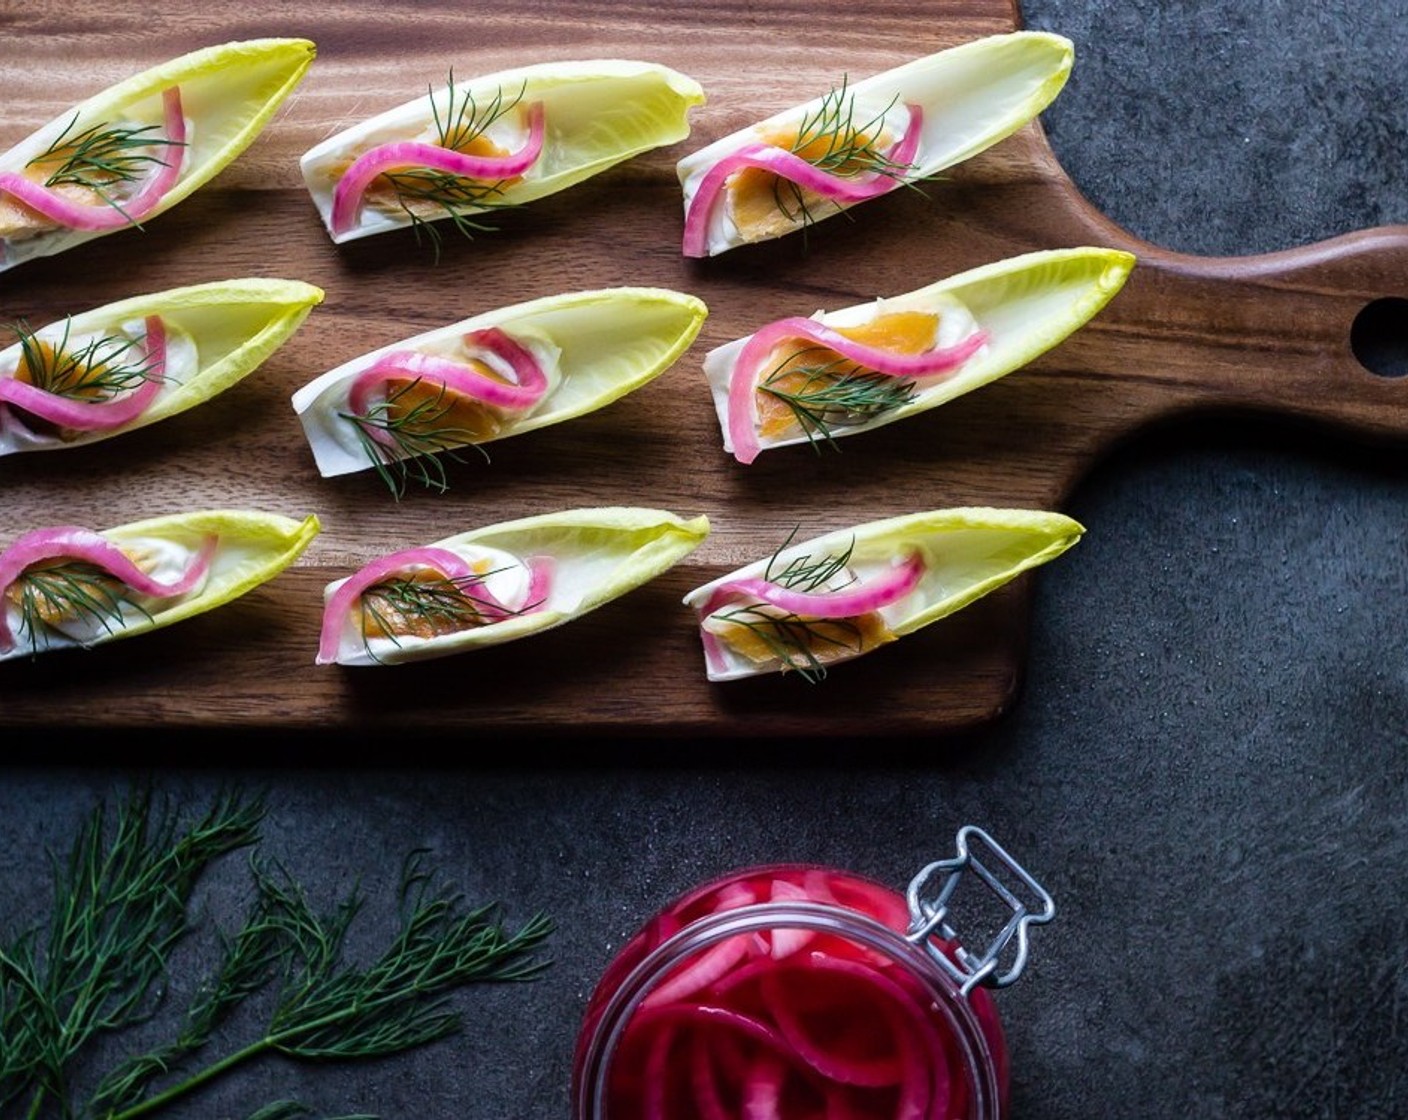 step 7 Take one slice of Pickled Red Onions (to taste) and garnish the top of each endive.